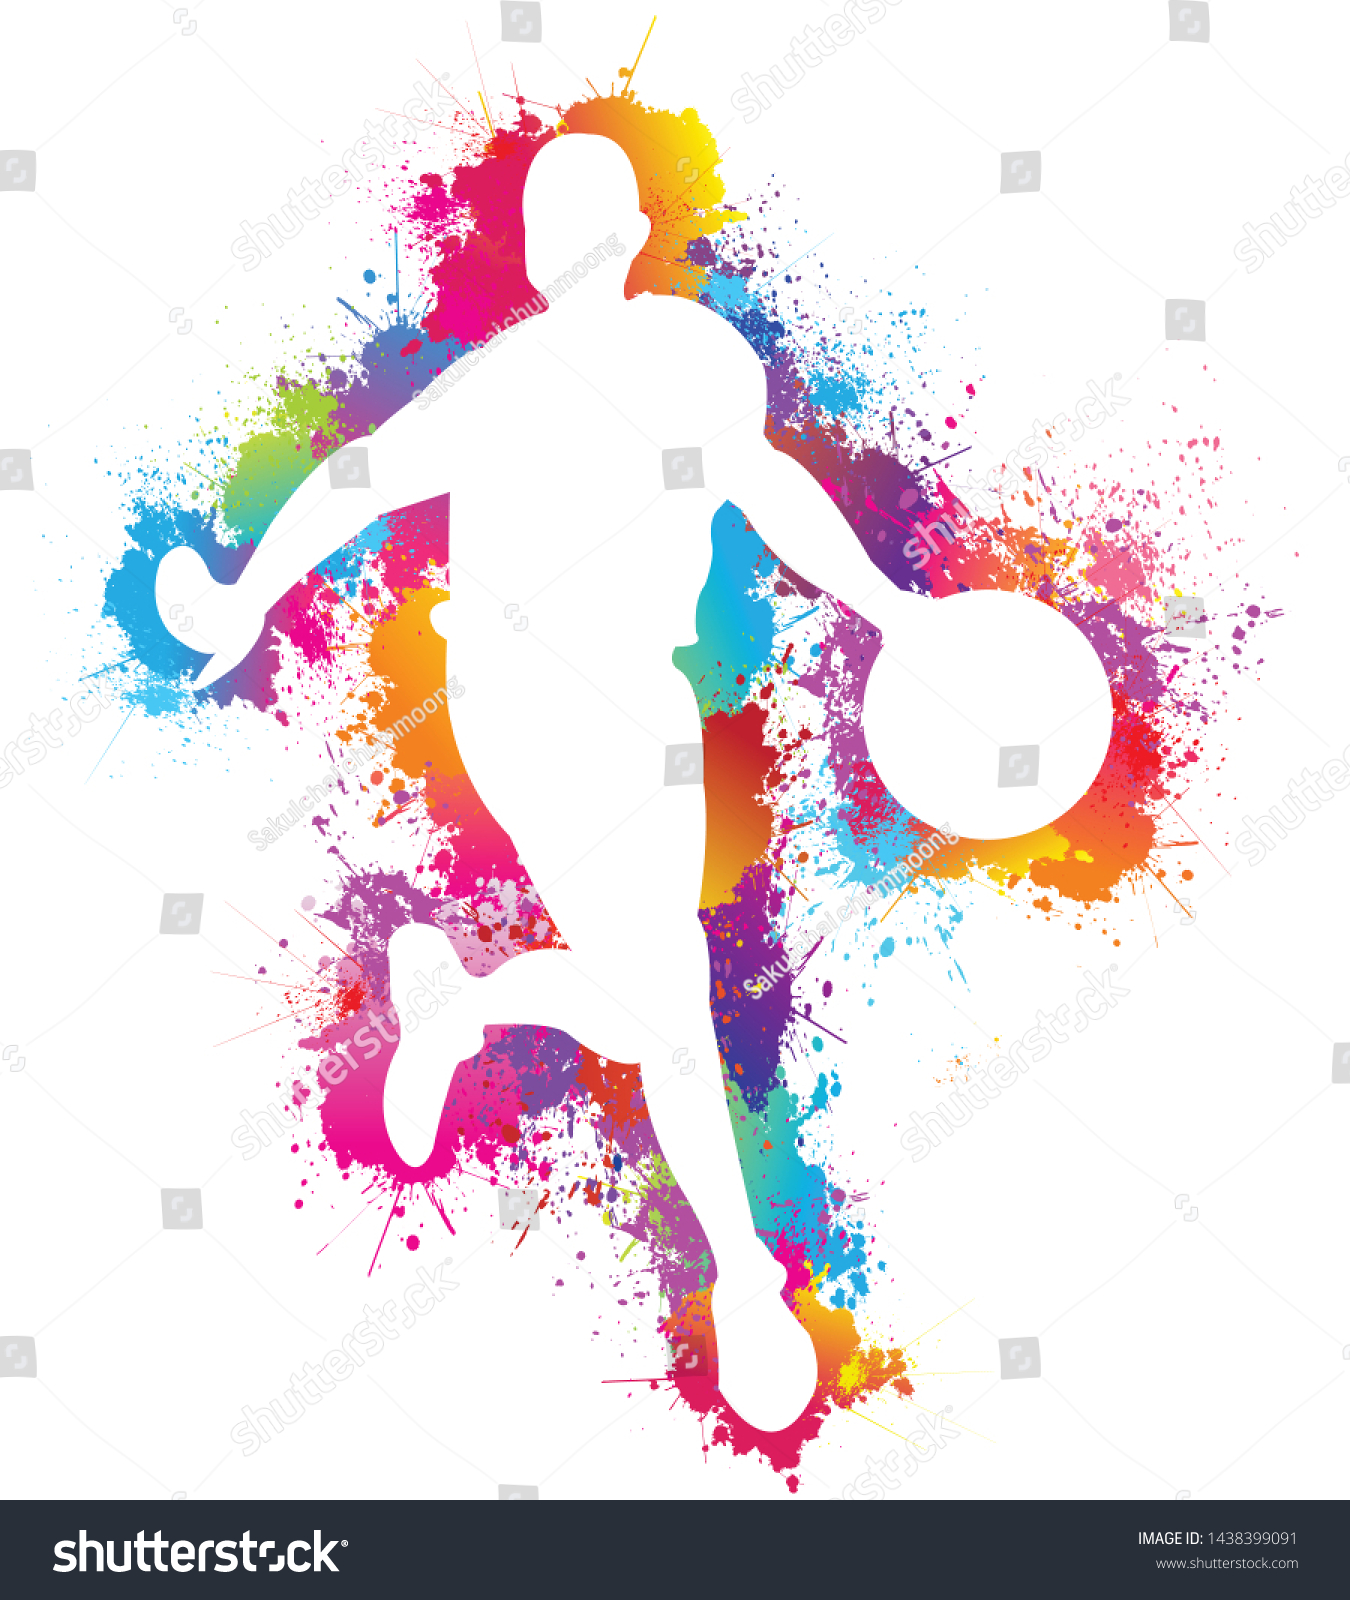 Sports Basketball Logo Design Colorful Paint Stock Vector (Royalty Free ...